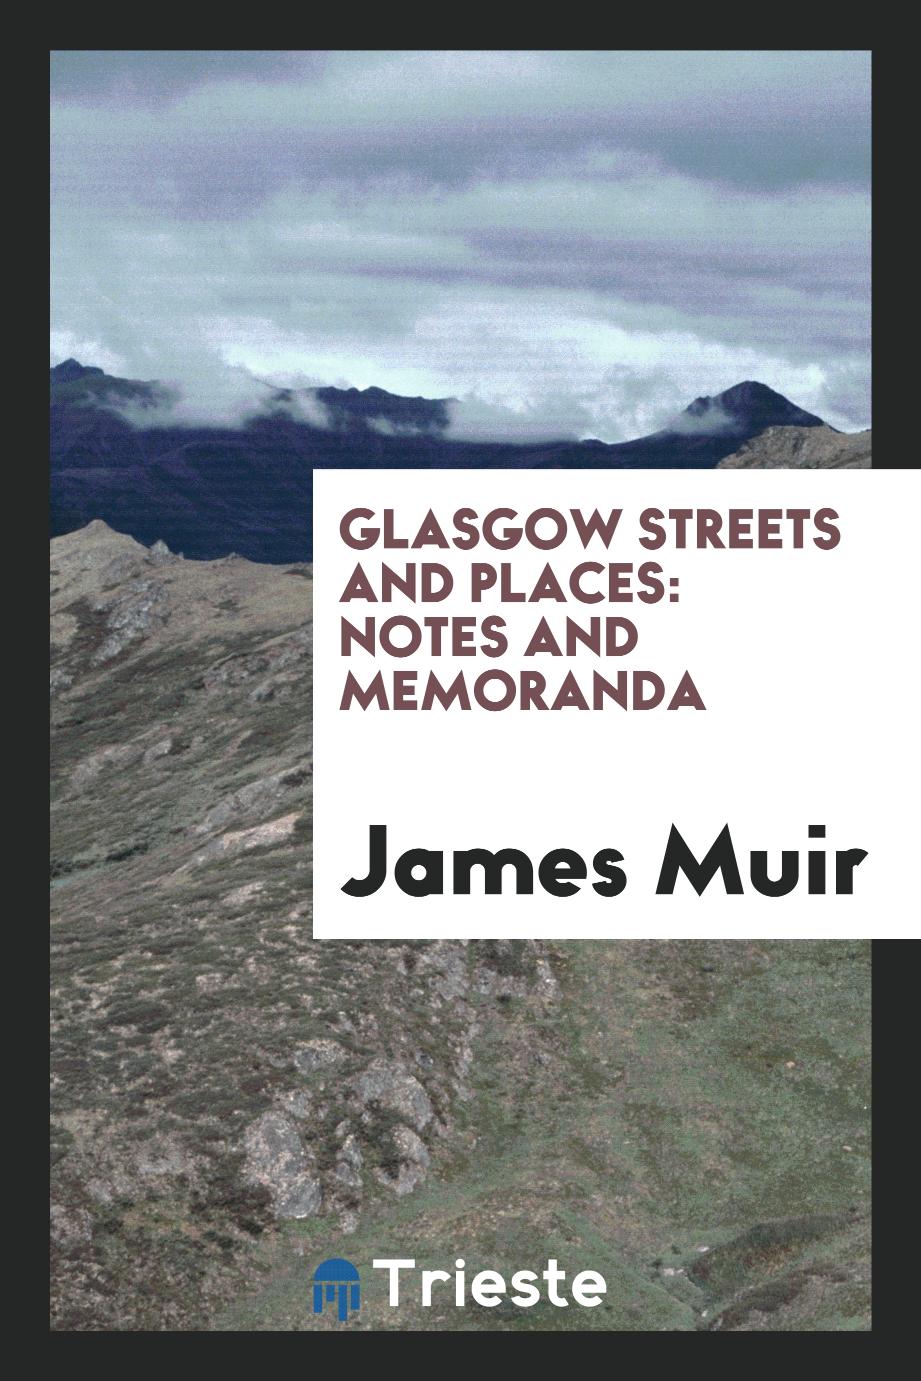 Glasgow Streets and Places: Notes and Memoranda